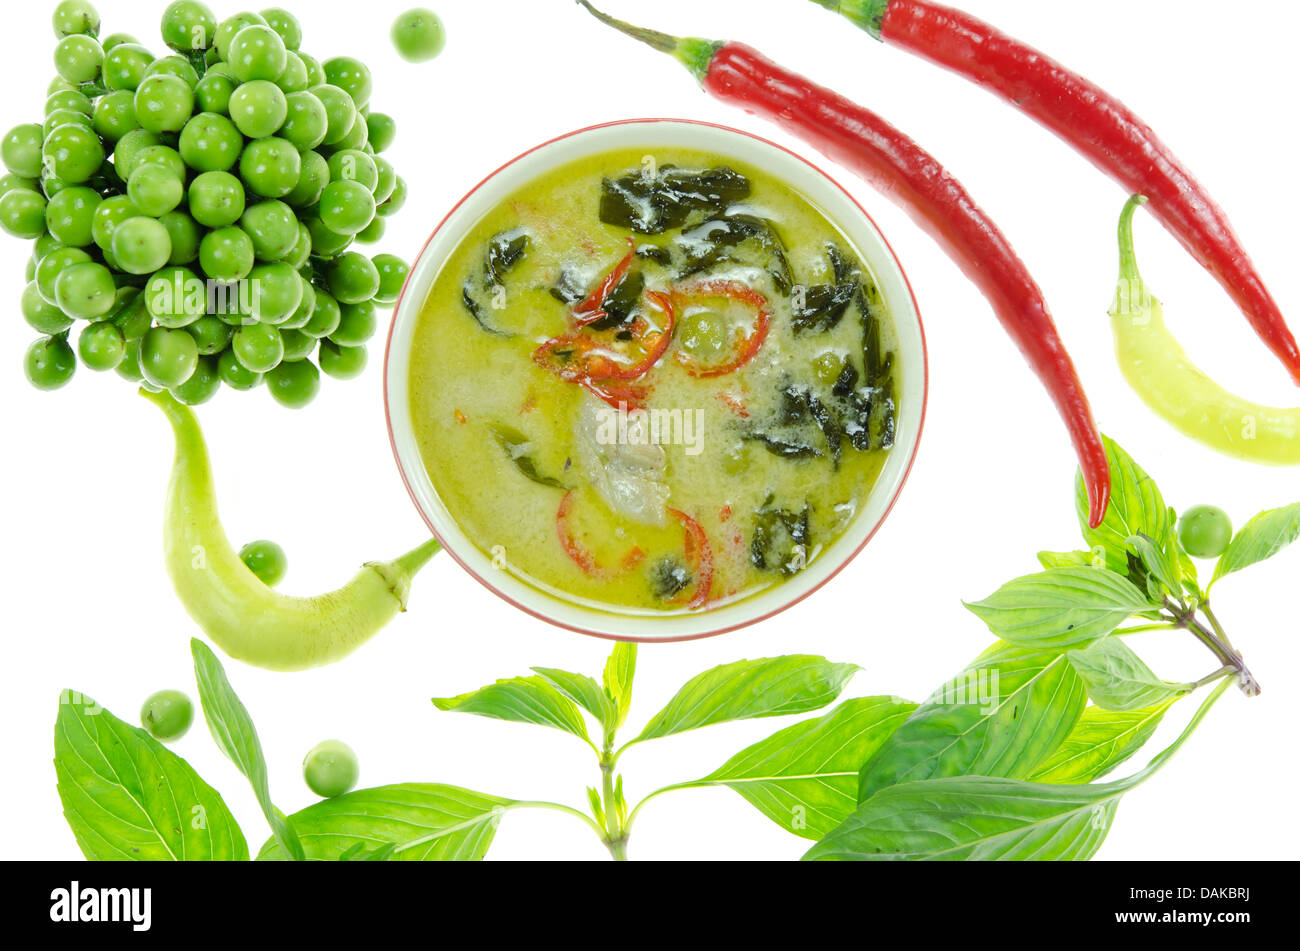 https://c8.alamy.com/comp/DAKBRJ/top-view-green-chicken-curry-with-fresh-vegetable-over-white-asian-DAKBRJ.jpg